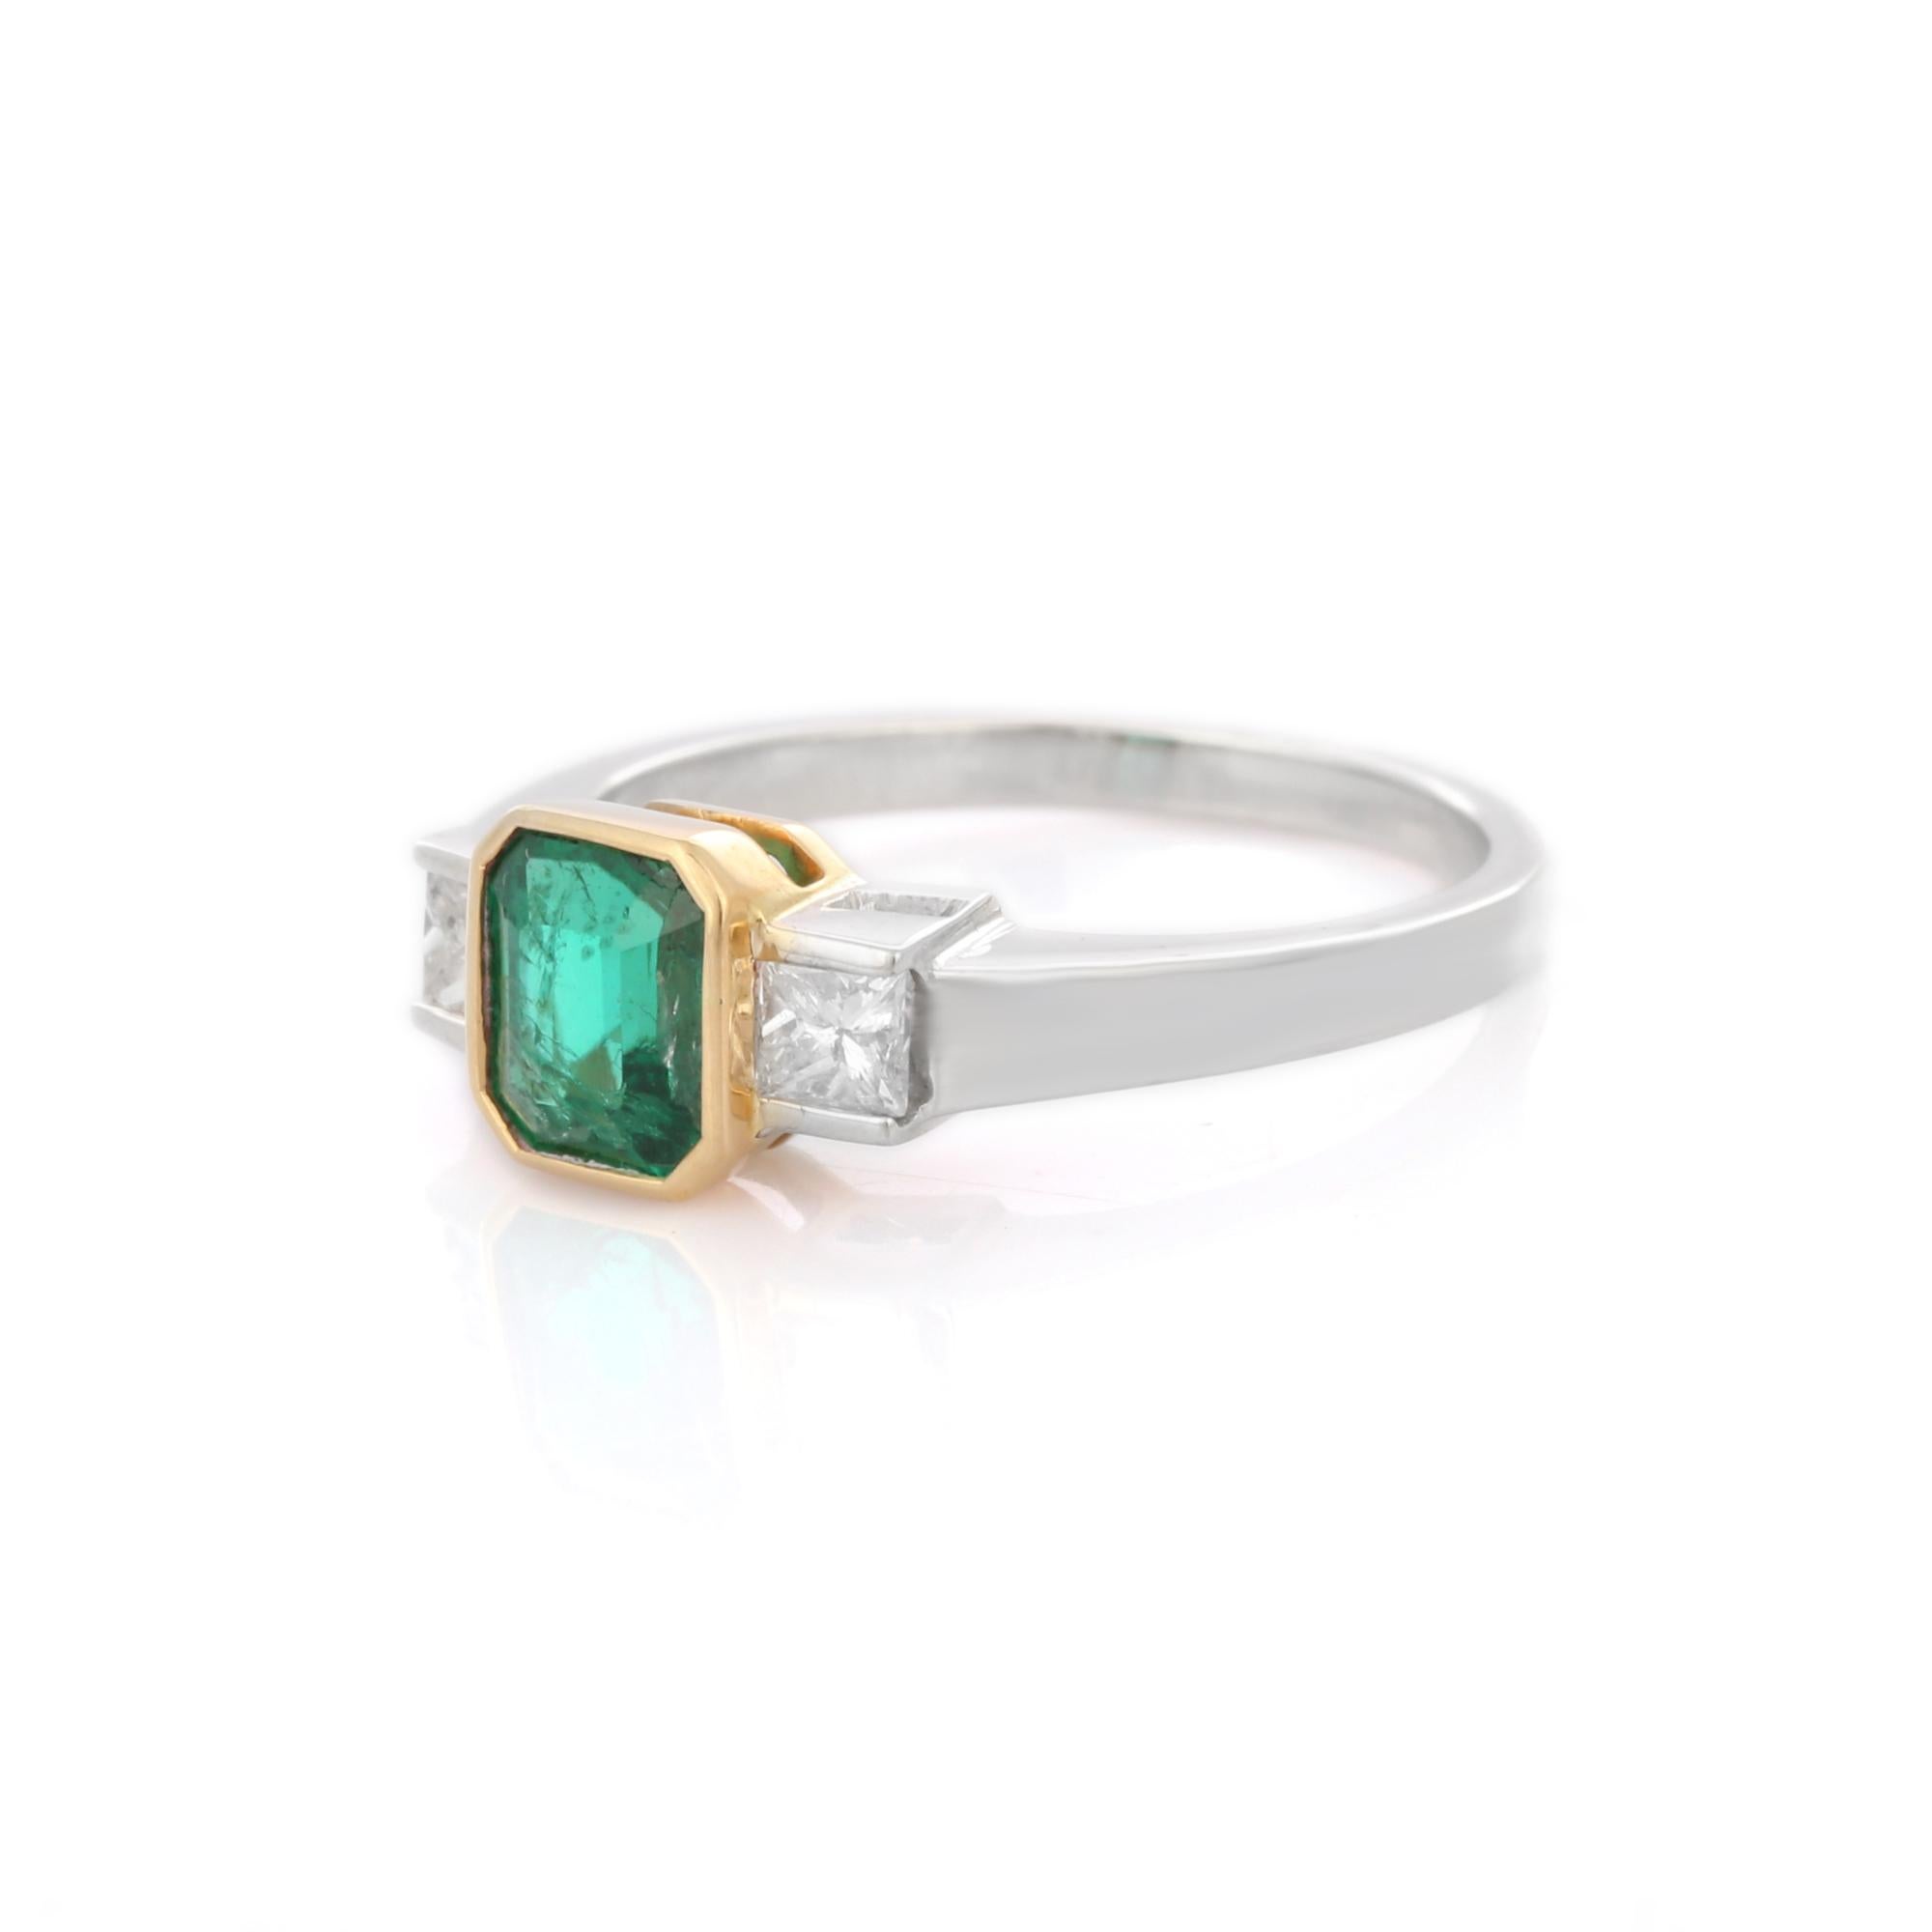 For Sale:  1.61 Carat Octagon Cut Emerald and Diamond Three Stone Ring in 18K White Gold 4